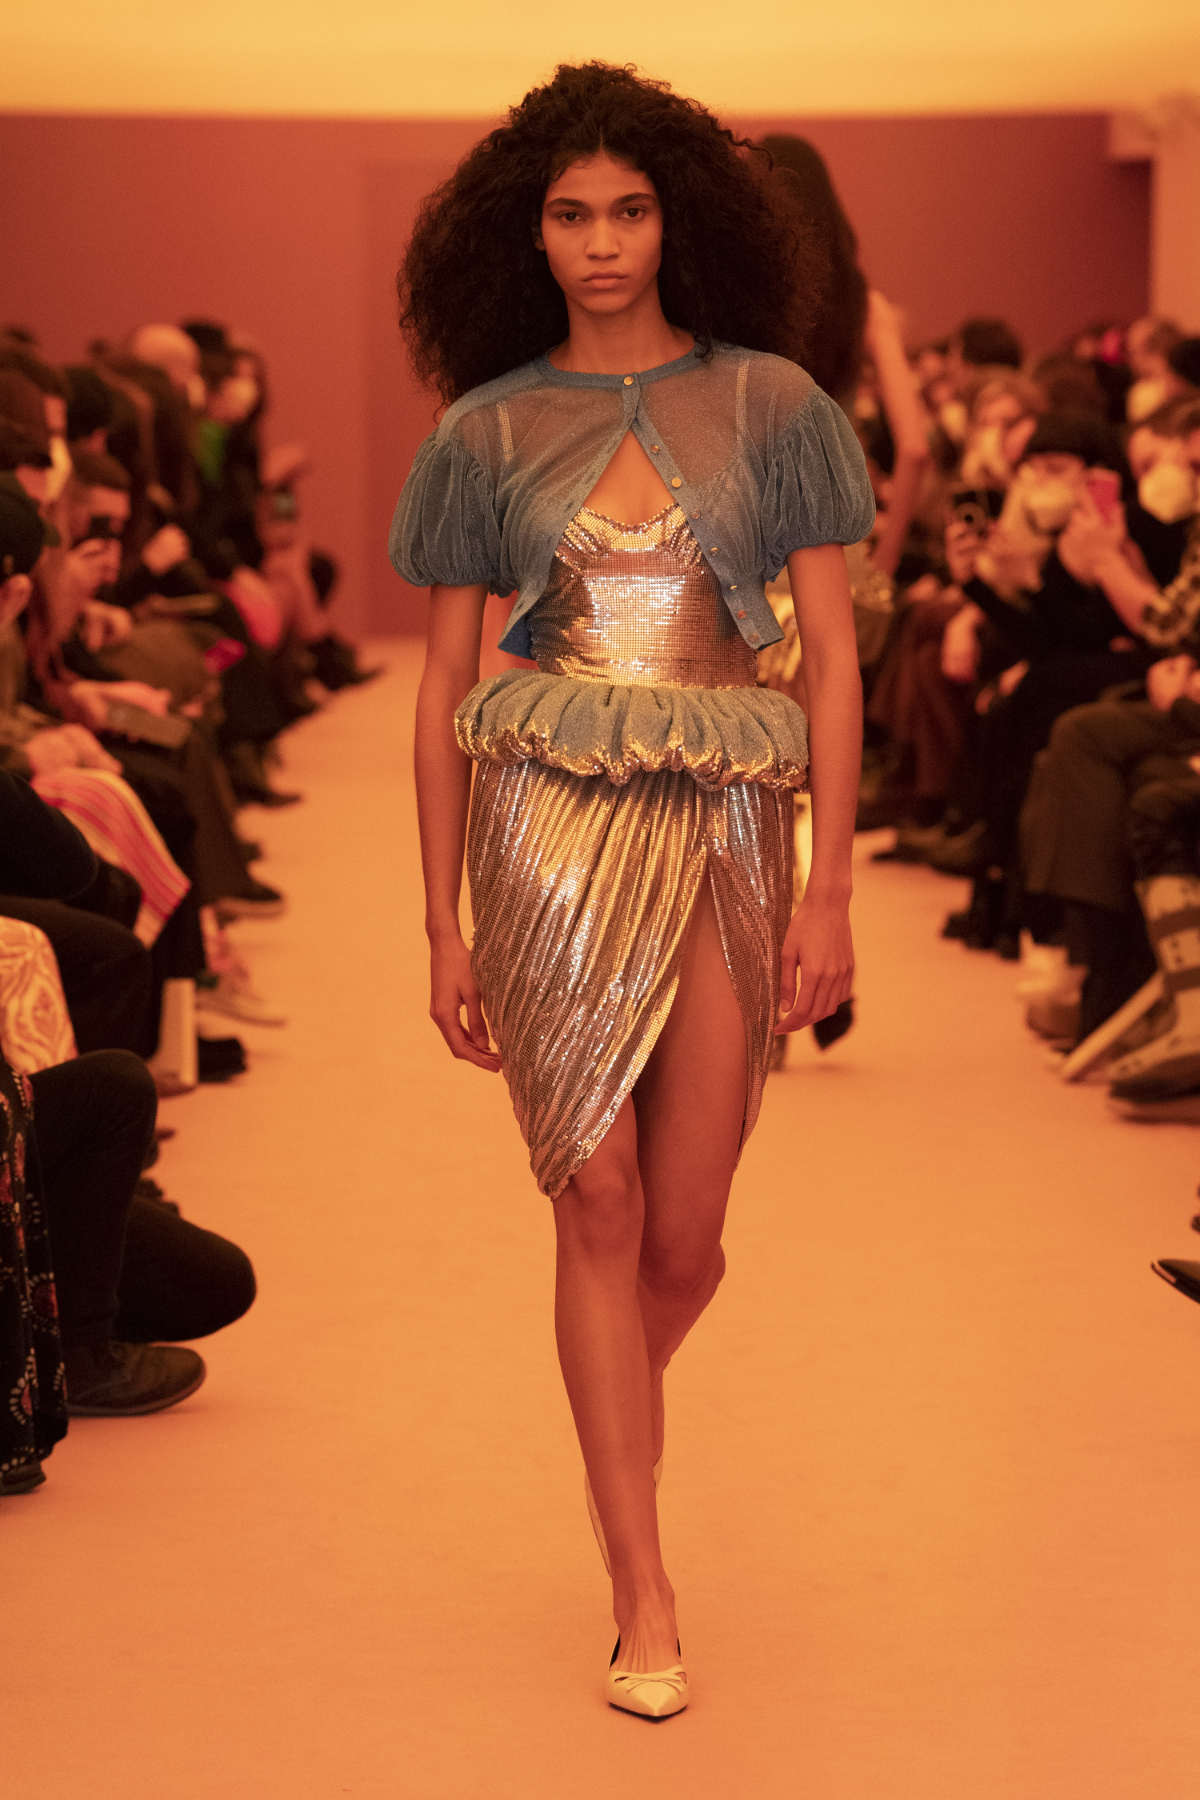 Paco Rabanne Presents Its New Fall-Winter 2022 Collection: Shifting Sensorial Perceptions